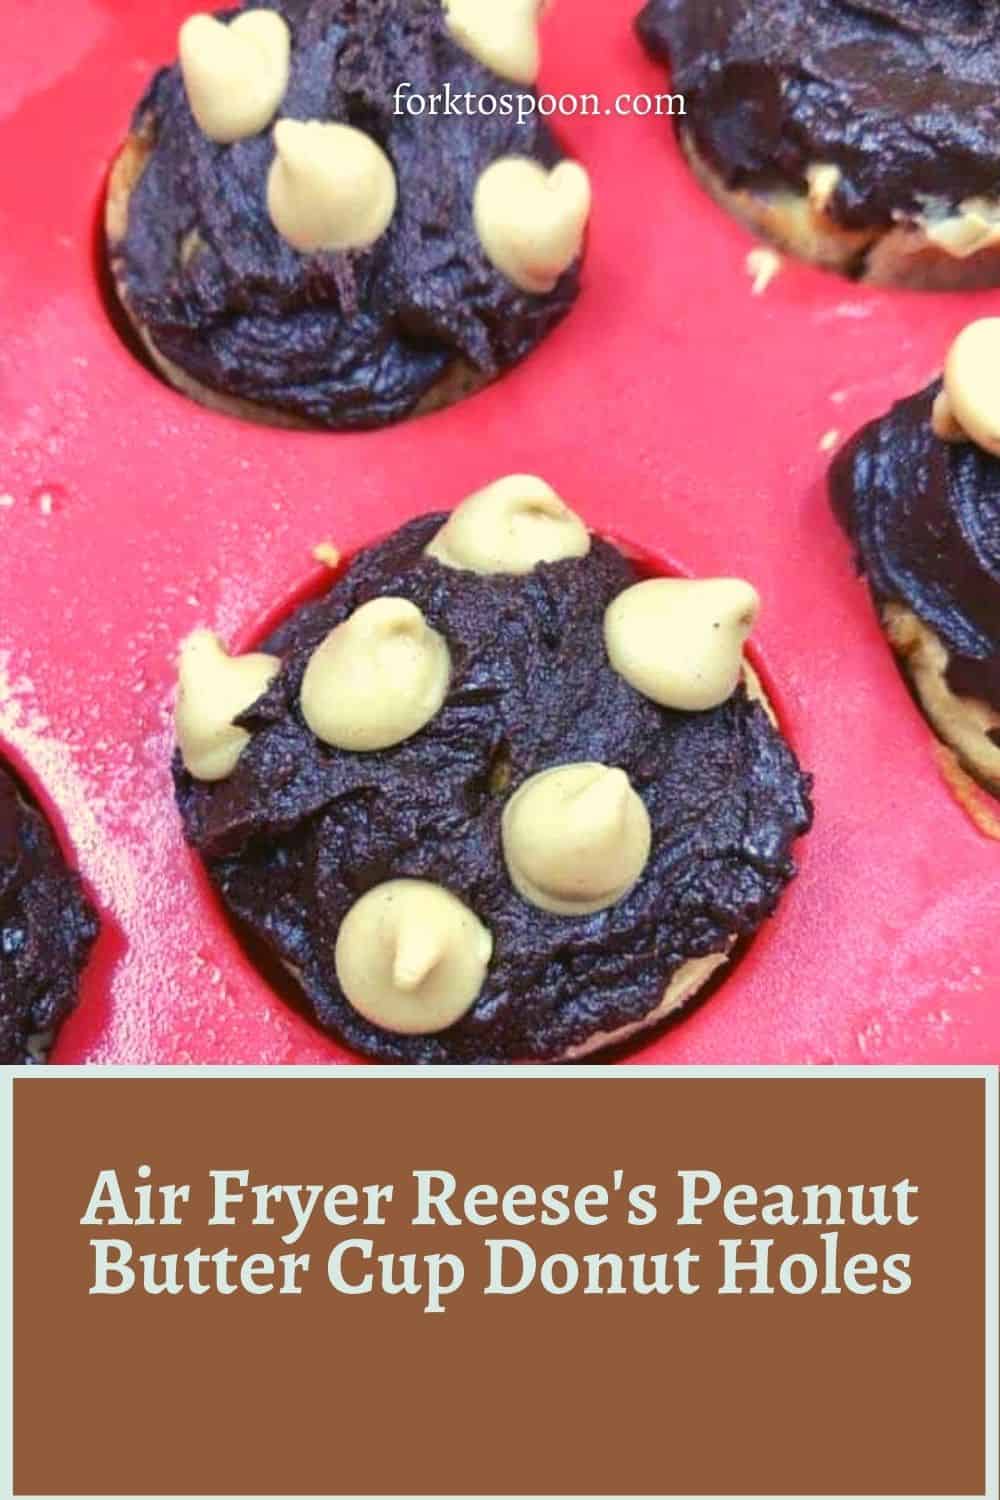 Air Fryer Reese's Peanut Butter Cup Donut Holes